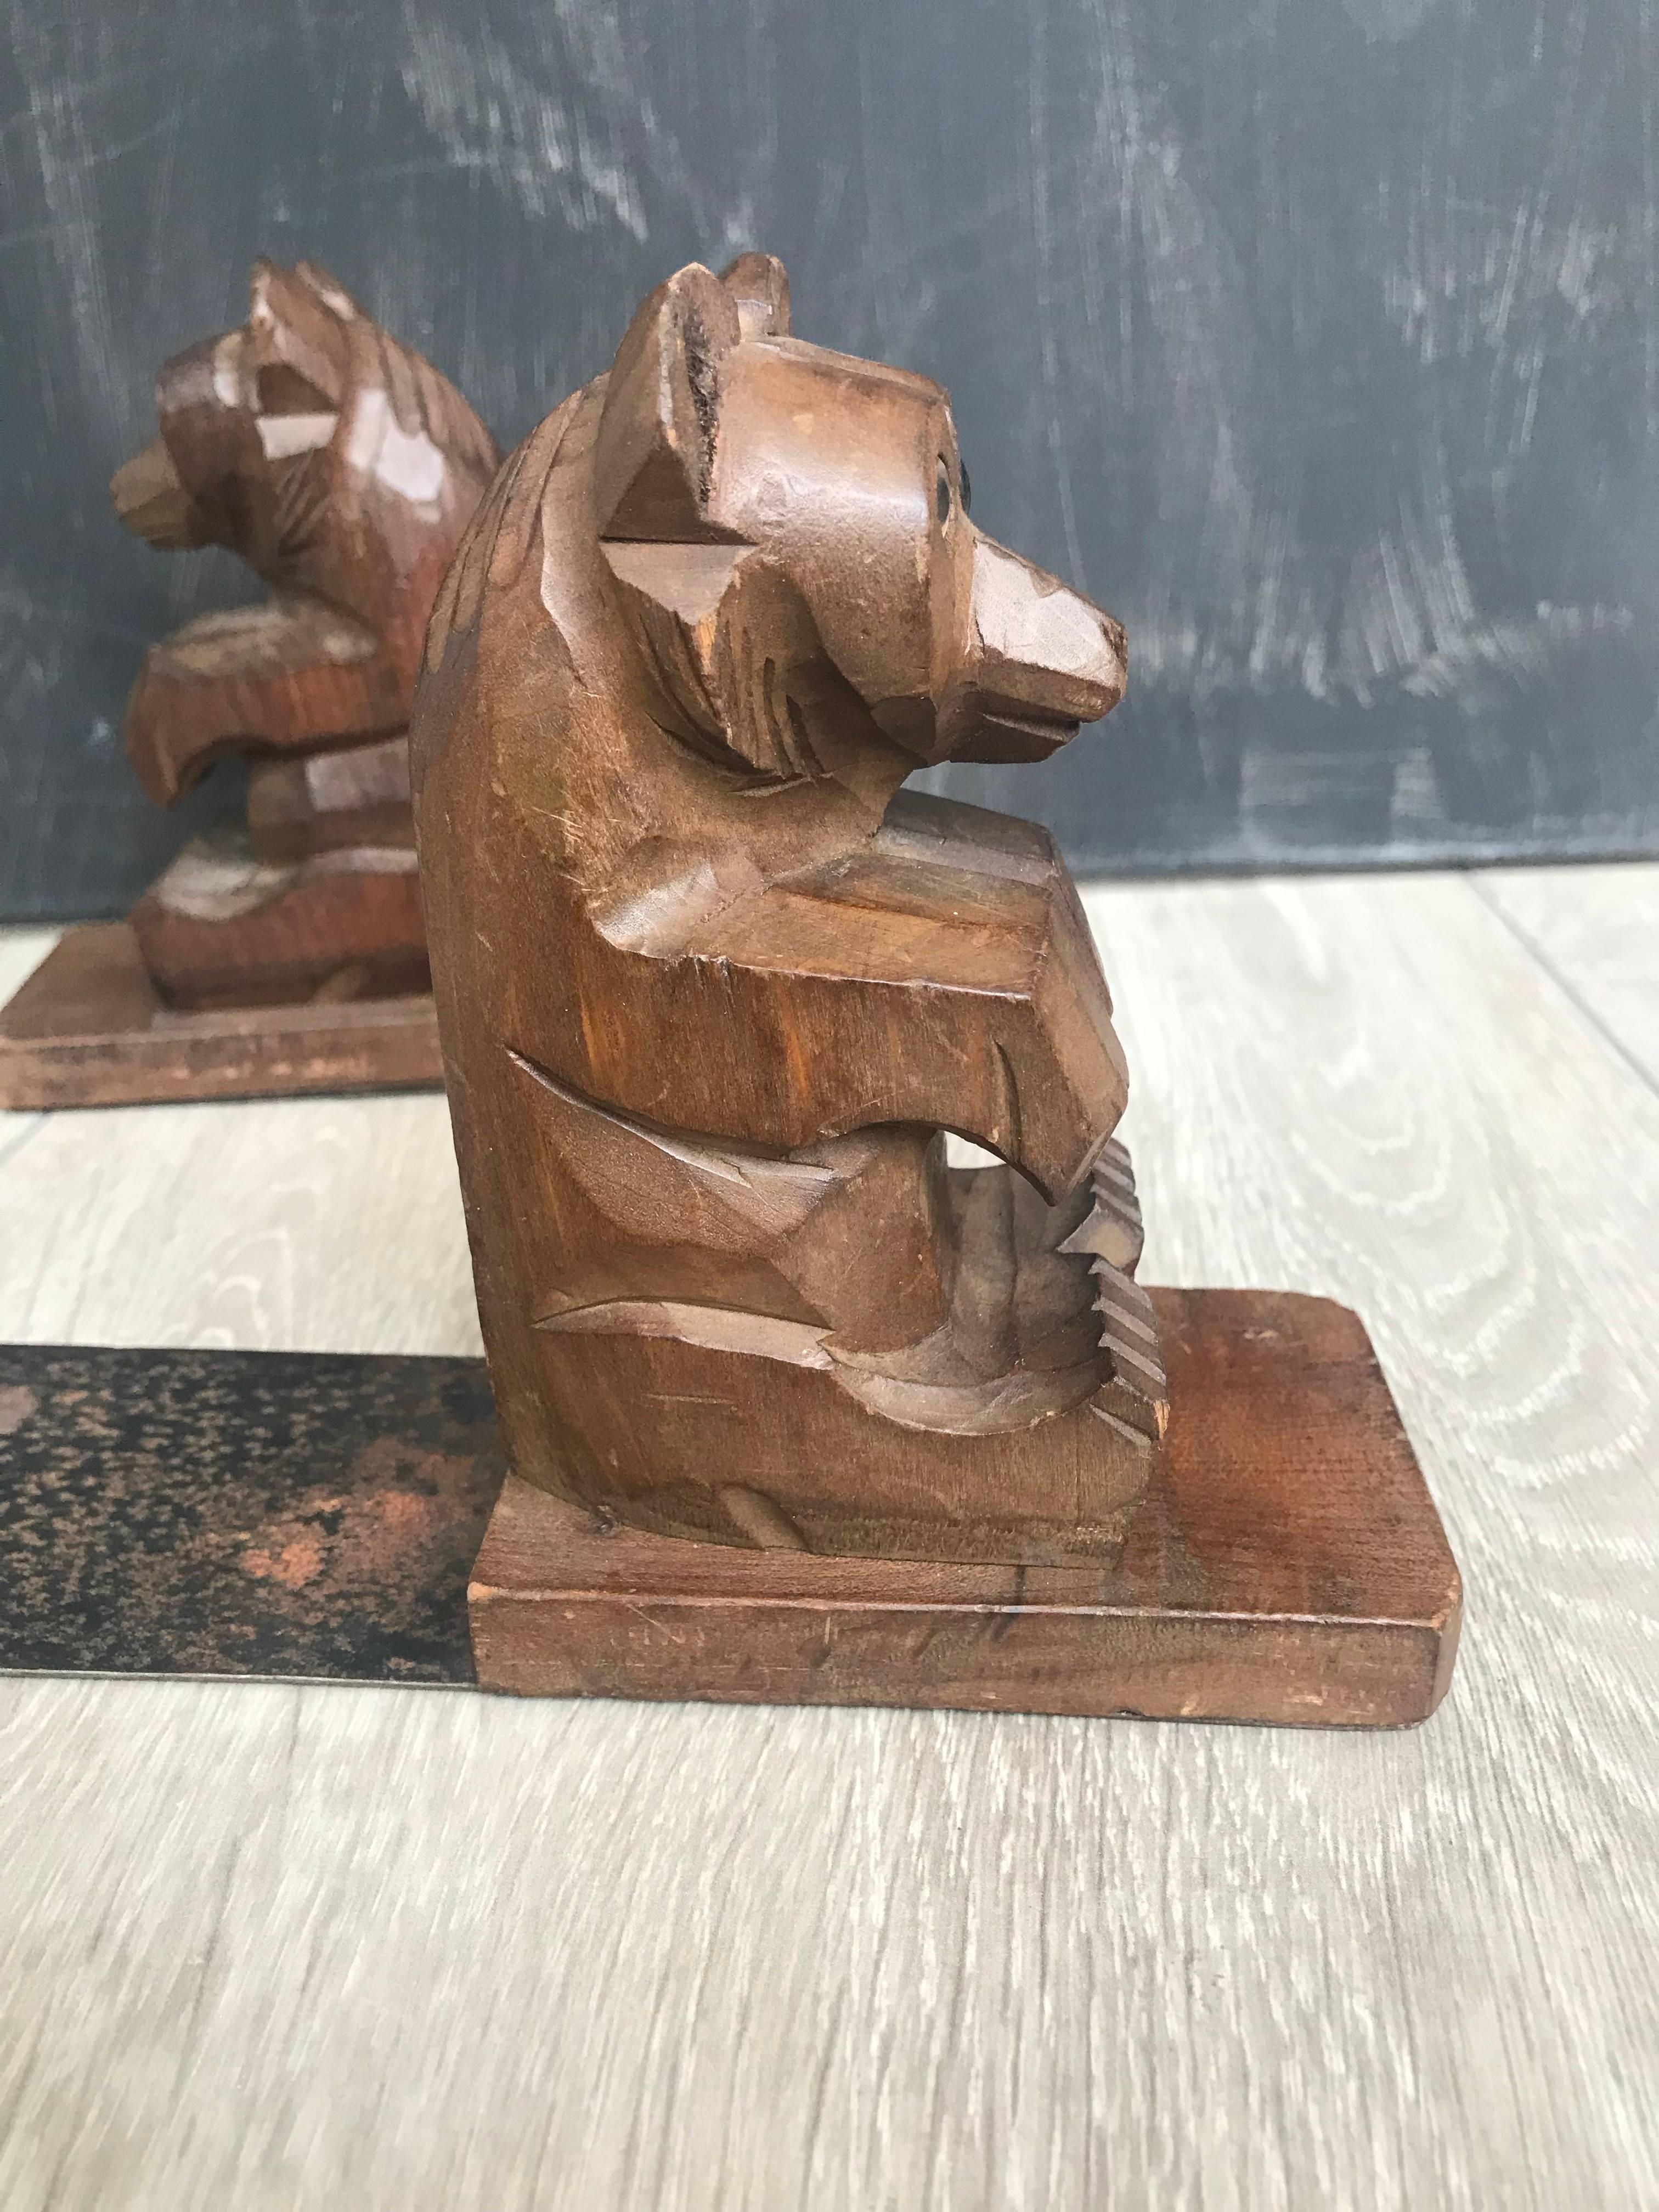 Highly Decorative Pair of Hand-Carved Art Deco Era, Wooden Sitting Bear Bookends For Sale 1